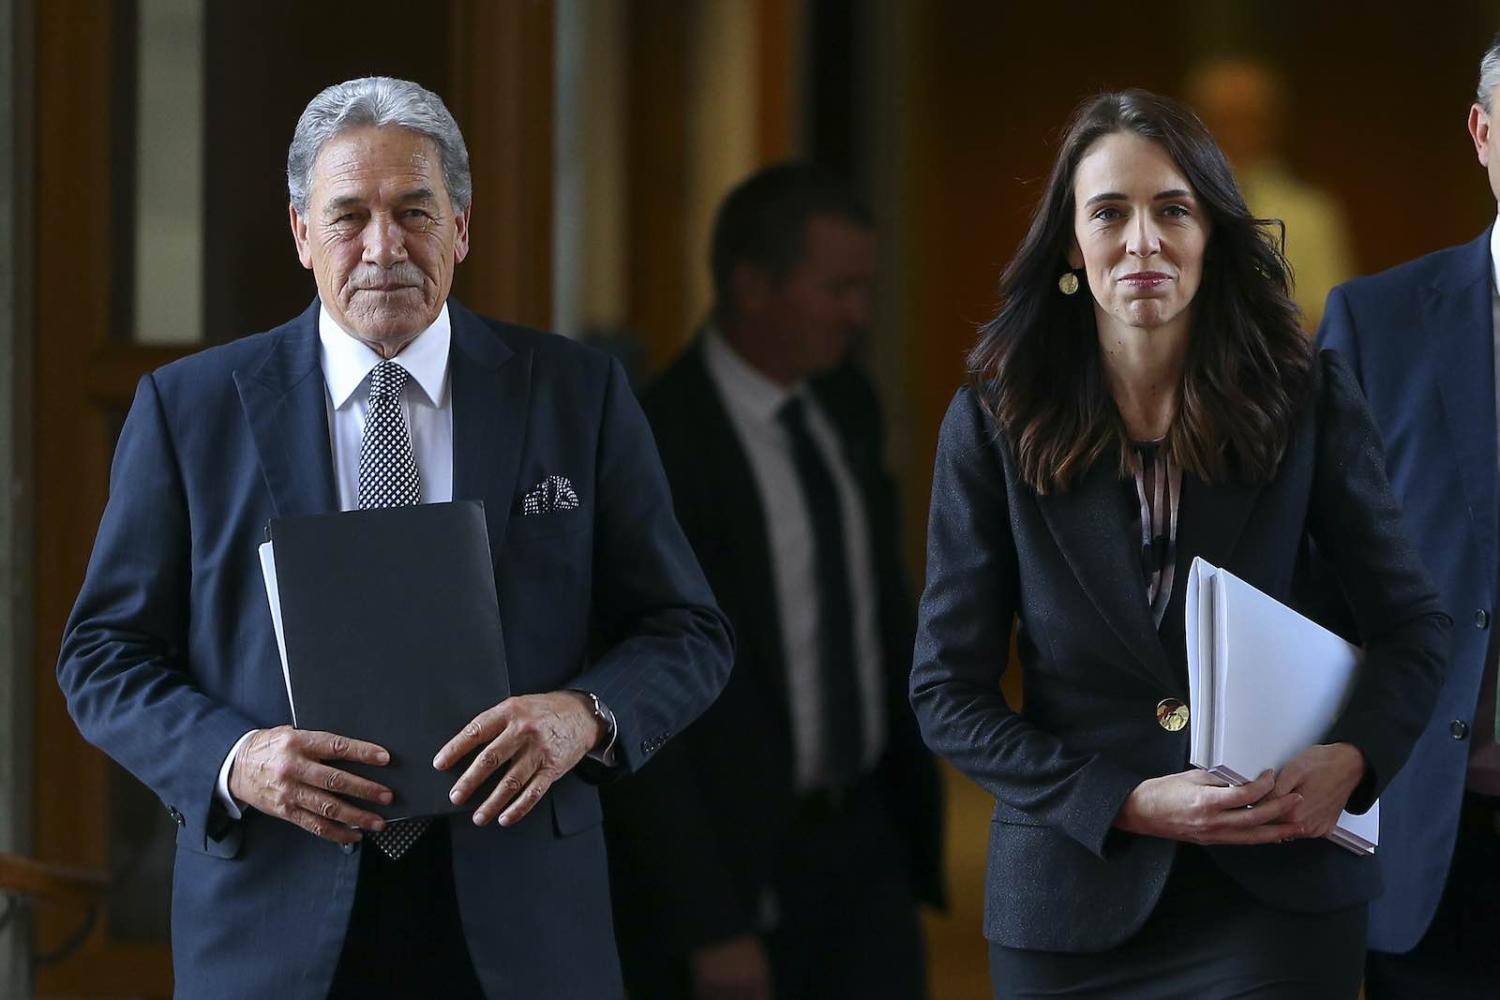 Foreign Minister Winston Peters and Prime Minister Jacinda Ardern before the New Zealand budget in May (Hagen Hopkins/Getty Images)